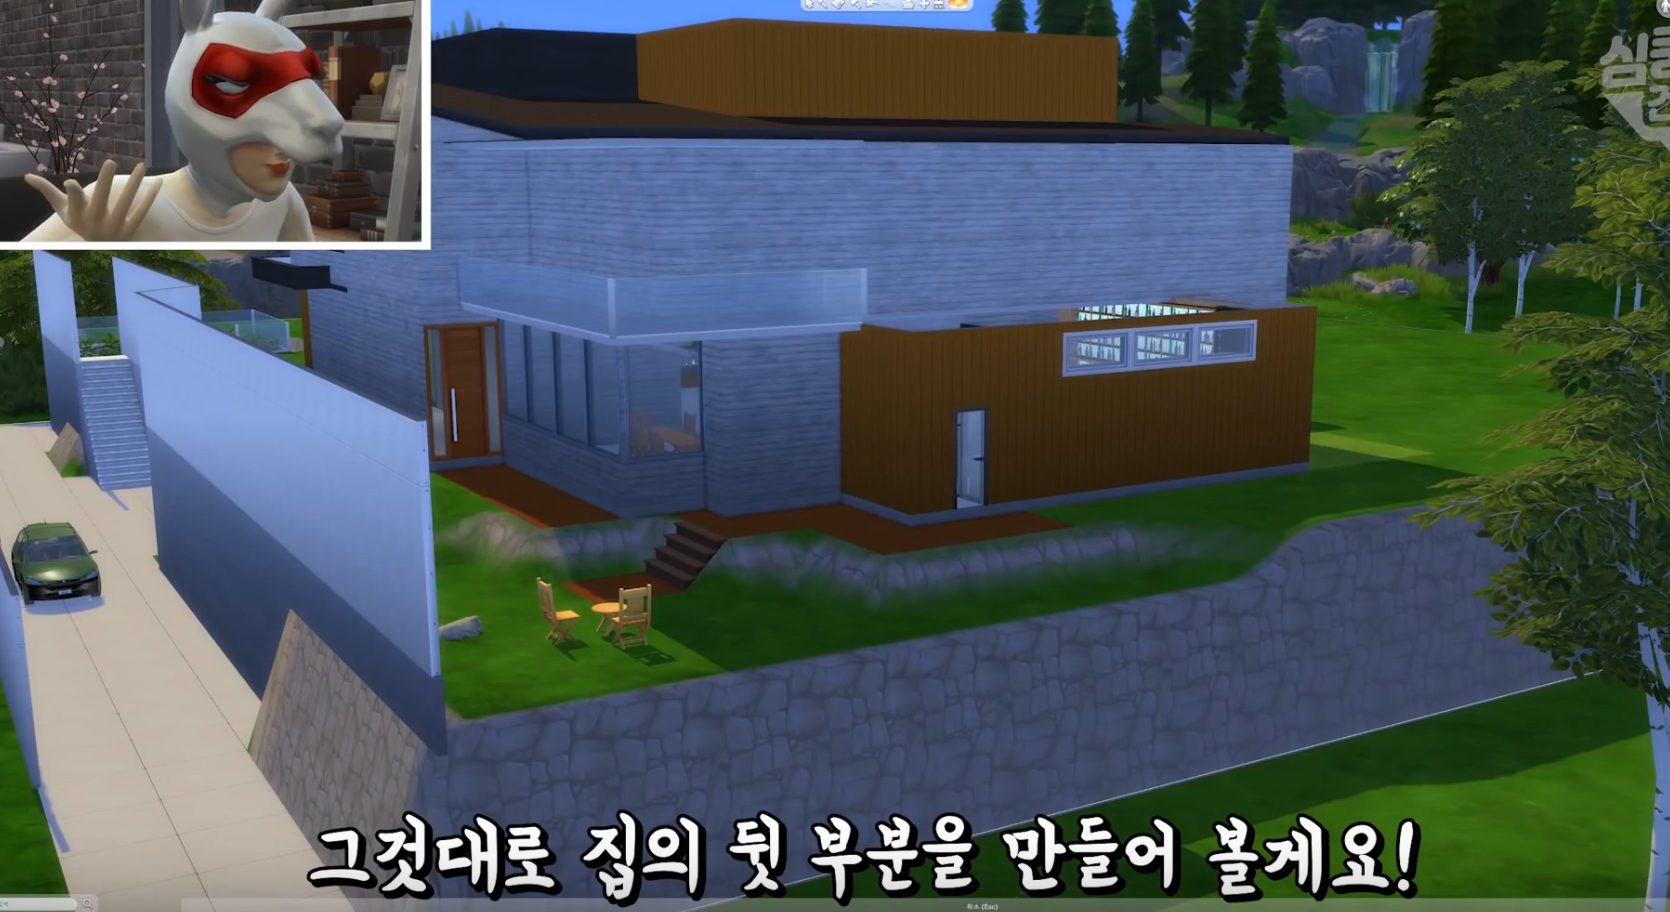 The Sims 4 Now Has The Modern House From The Award-Winning Movie Parasite